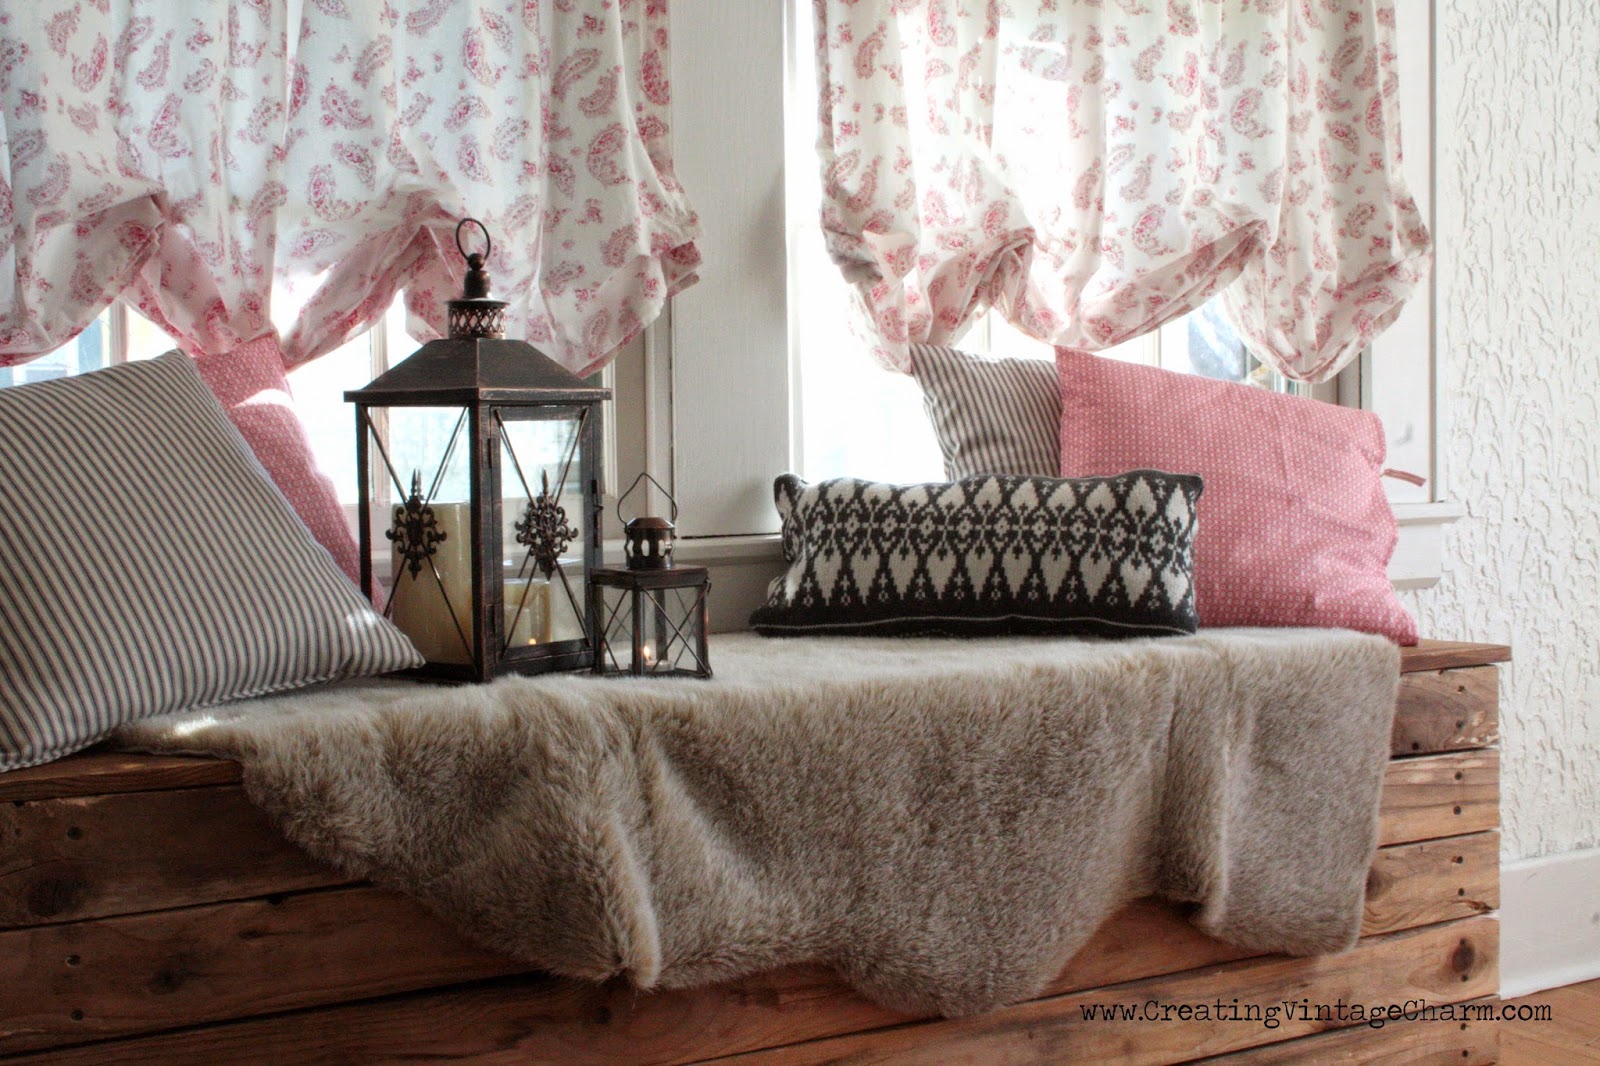 Creating Vintage Charm: Thrifty DIY Part One: Faux Fur Throw Rug